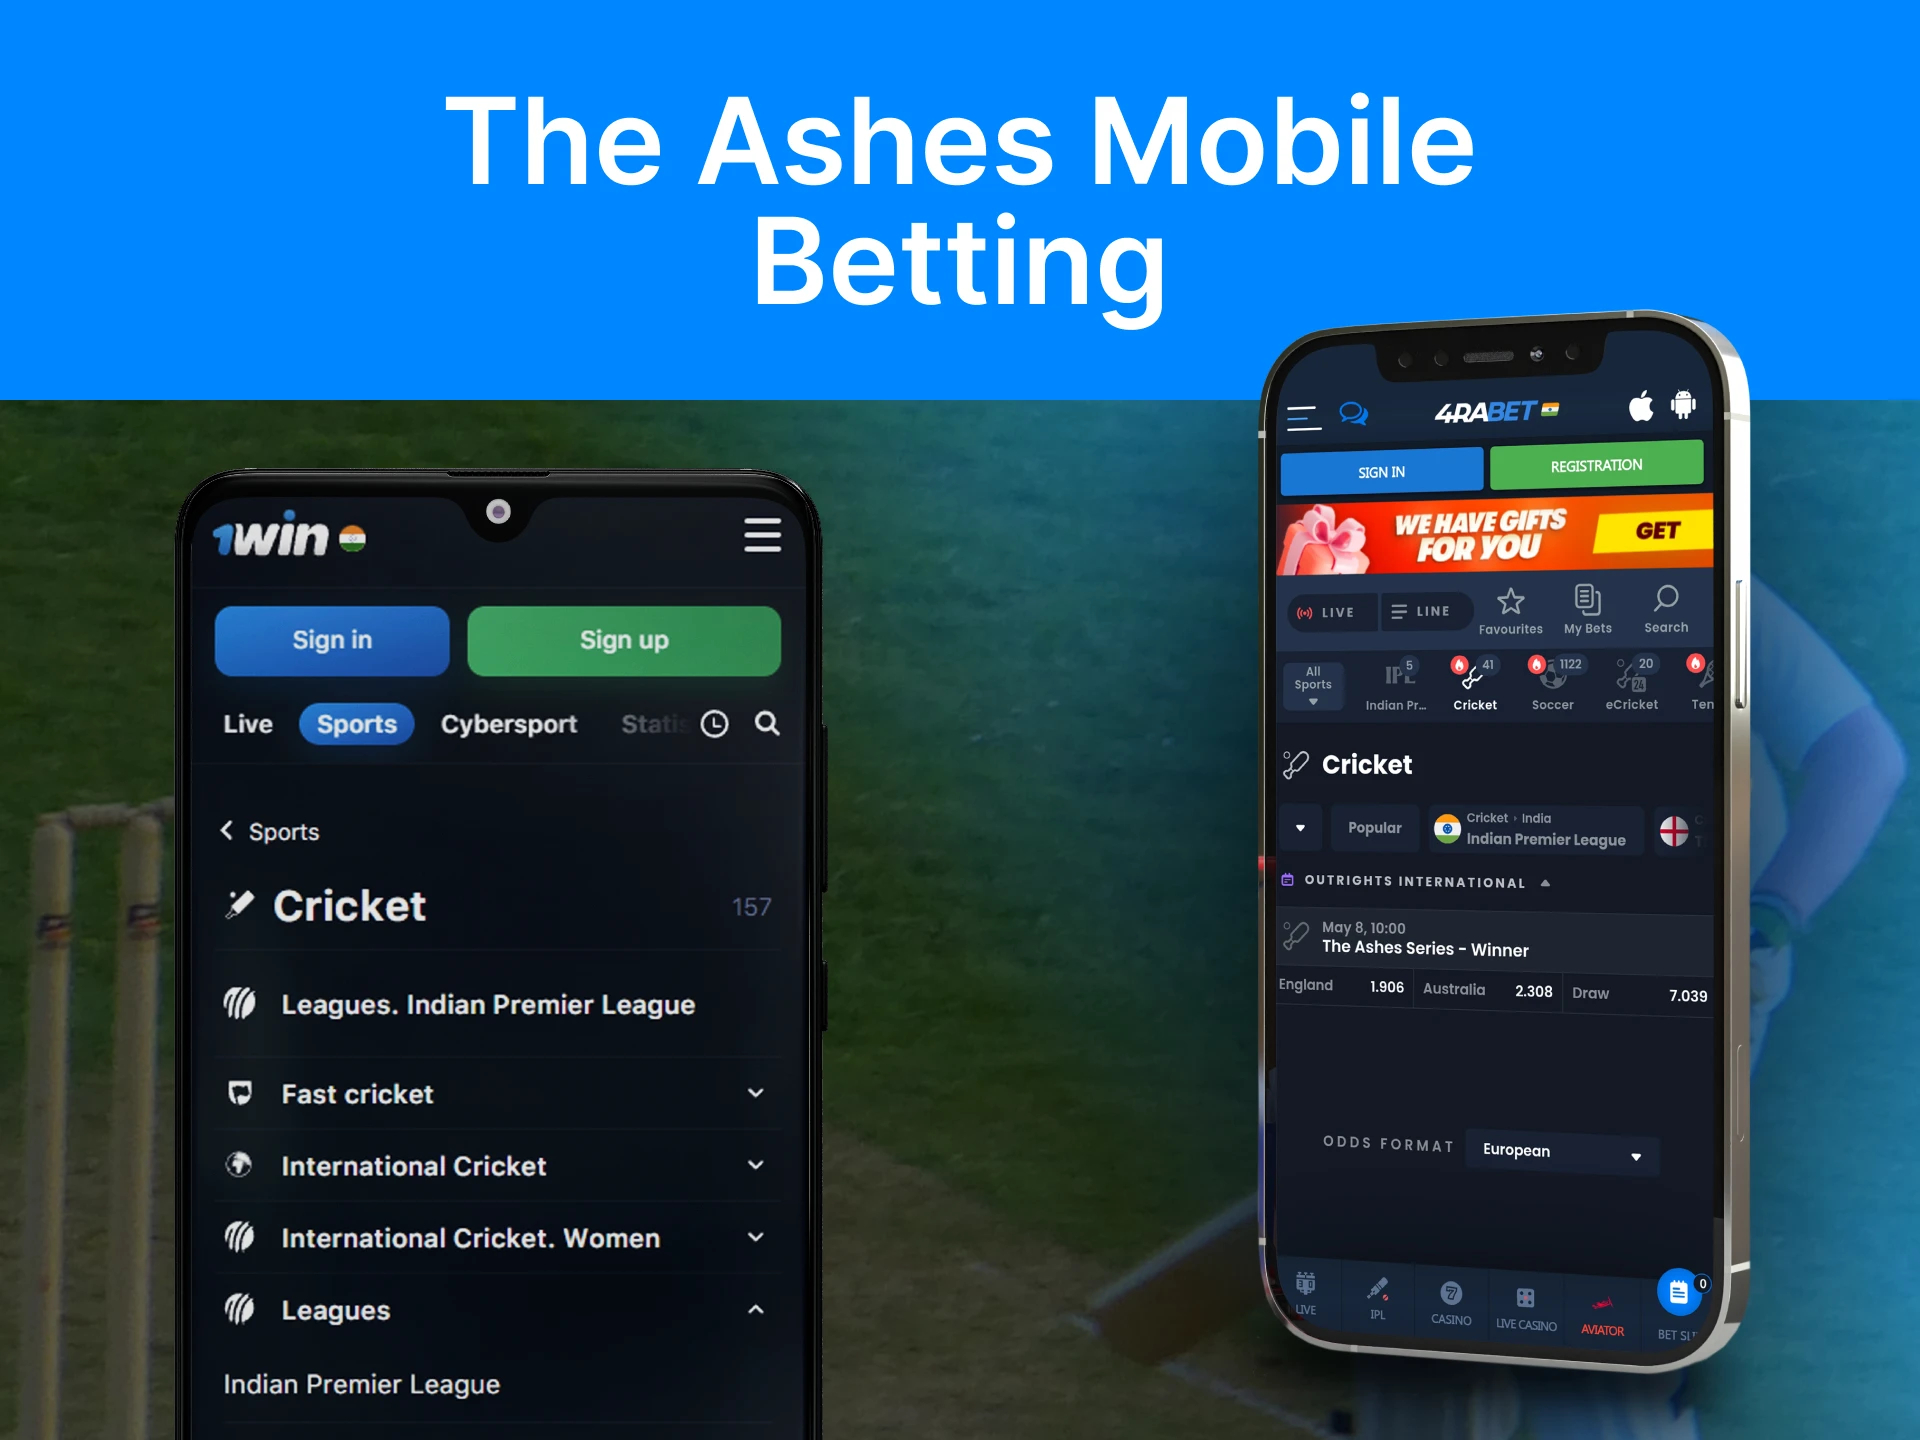 Betting apps usually include The Ashes Series in the list of matches.